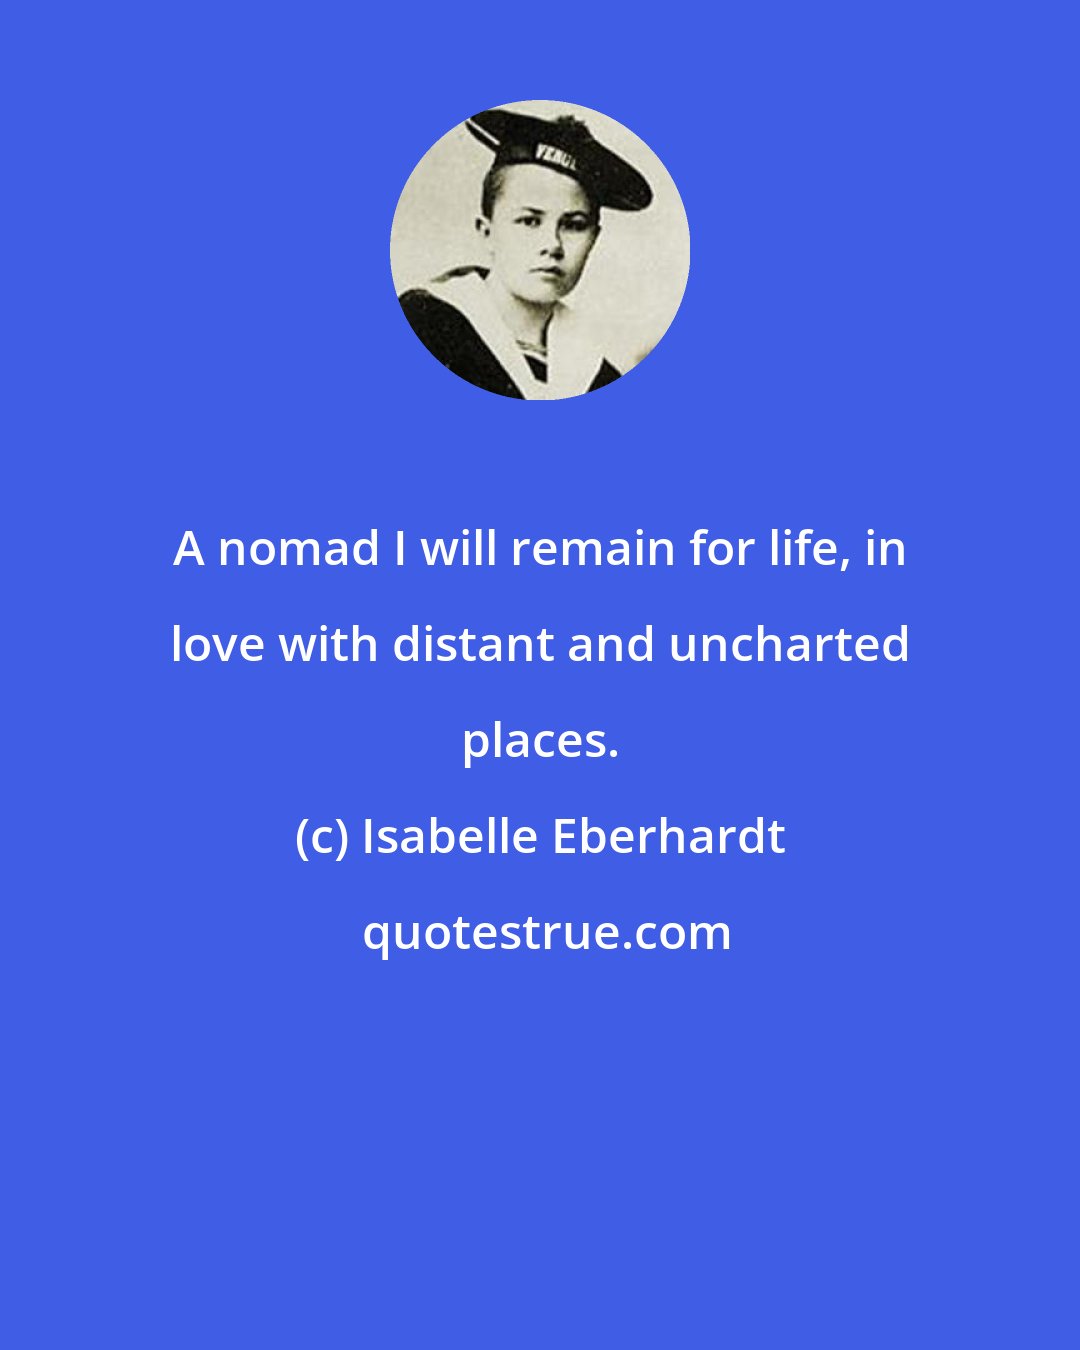 Isabelle Eberhardt: A nomad I will remain for life, in love with distant and uncharted places.